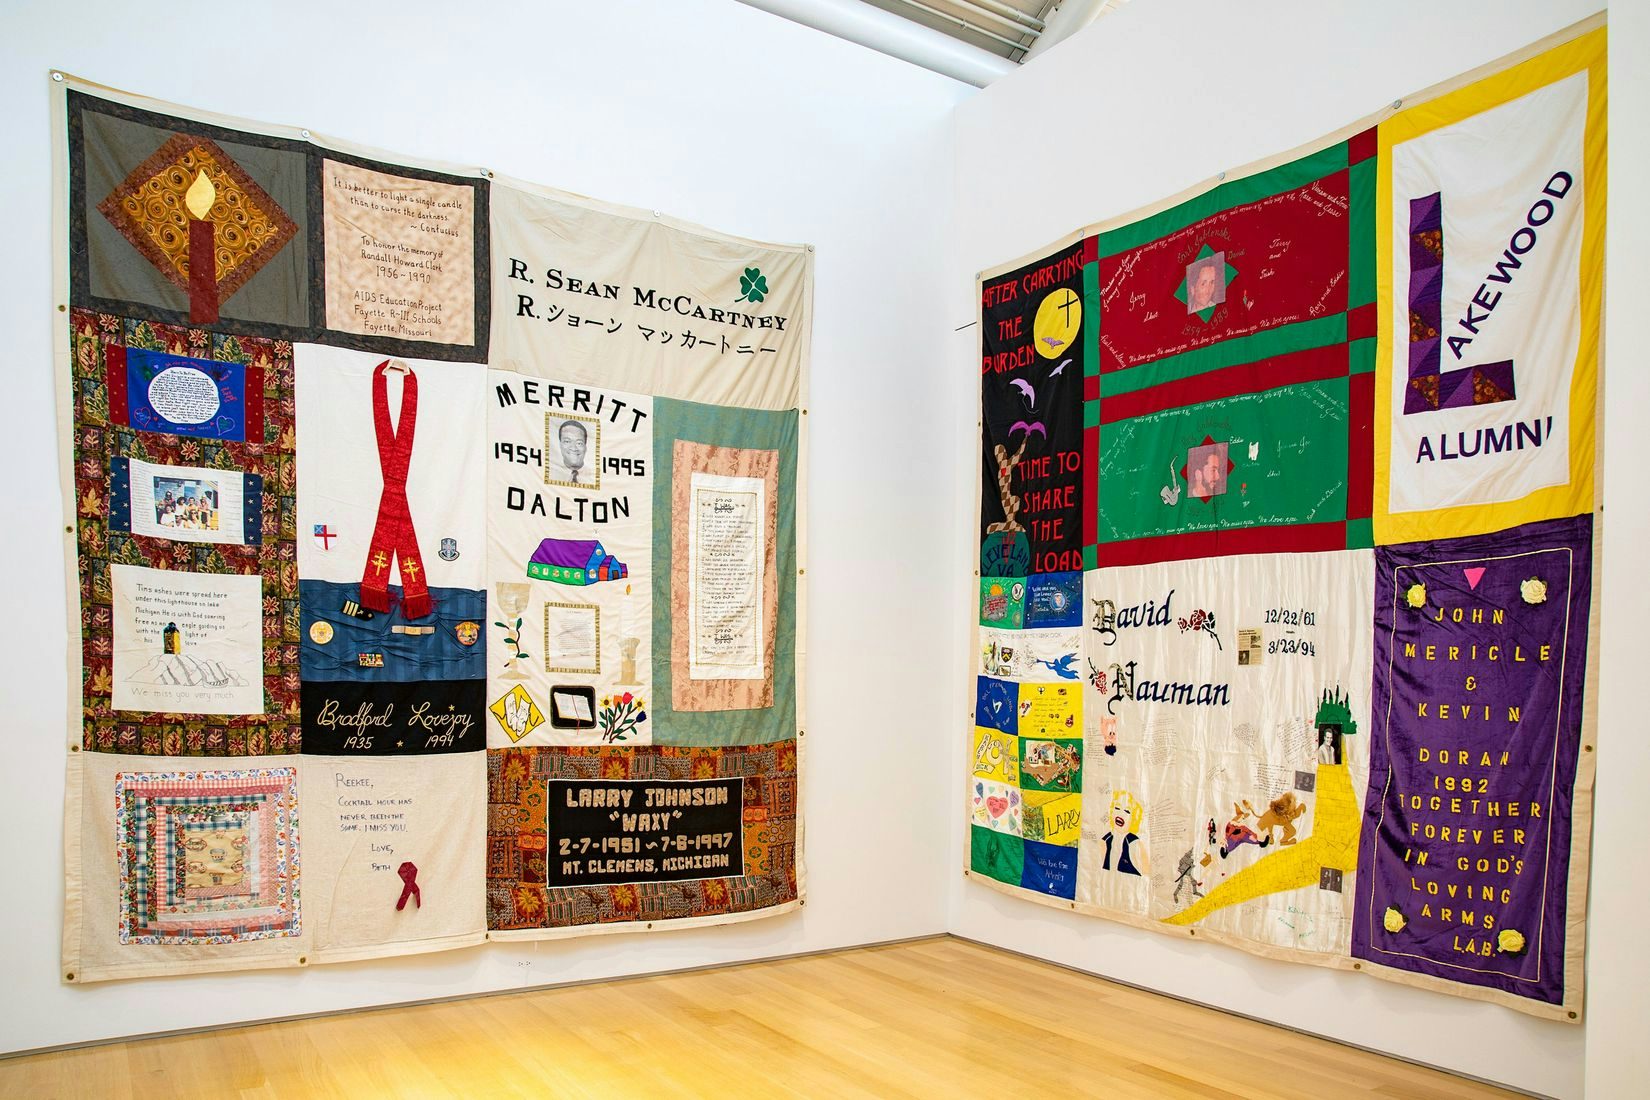 Installation image of AIDS memorial quilts